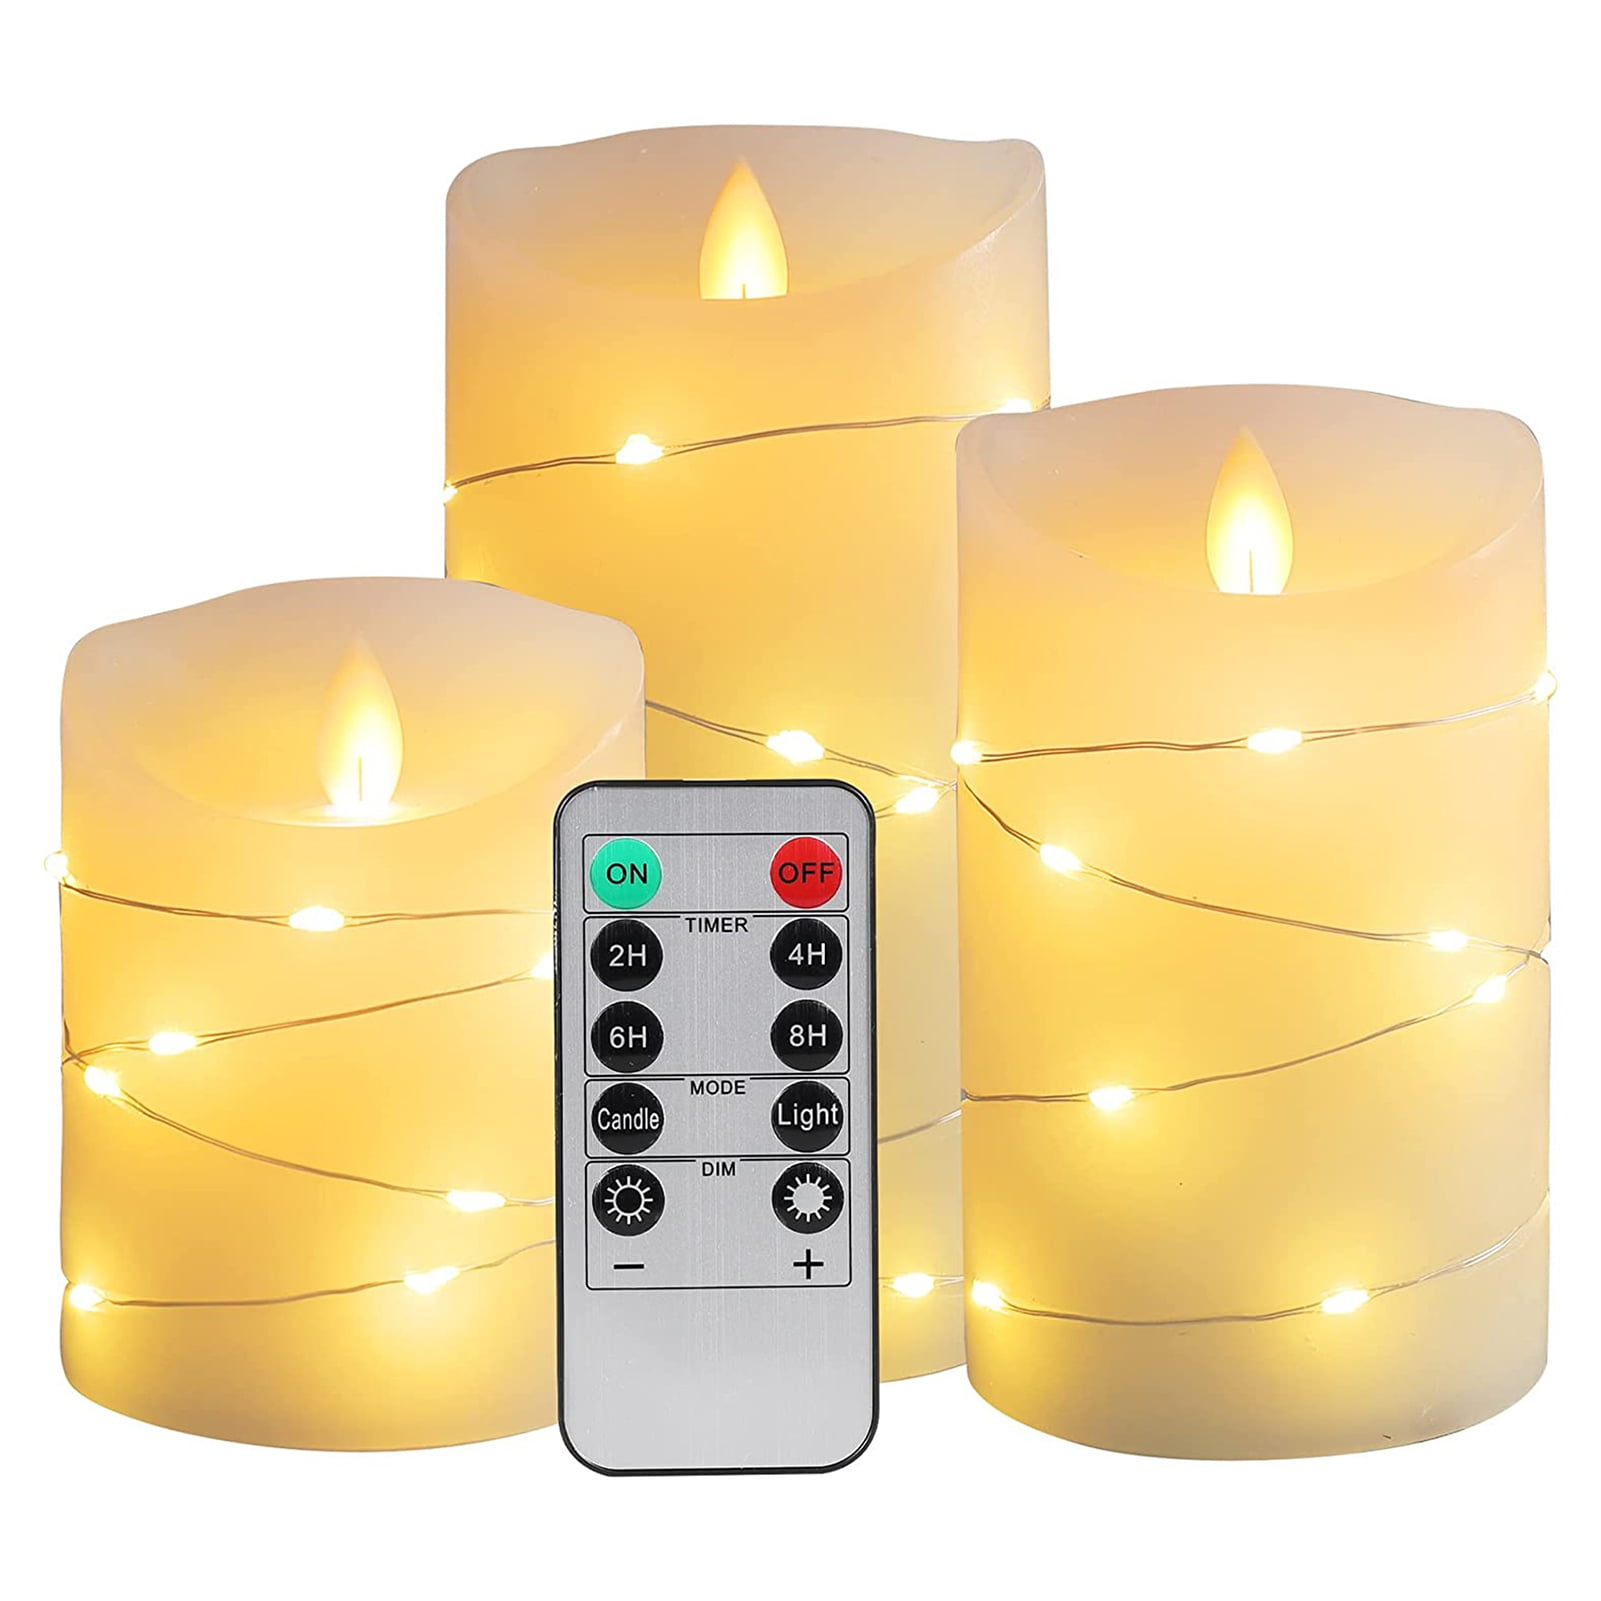 Firxreer Remote Candles | Led Candles Flickering Bulk | 3/set LED Flameless Candles Embedded String Lights, Realistic Candles With Timer For Wedding Christmas Decorations - Walmart.com